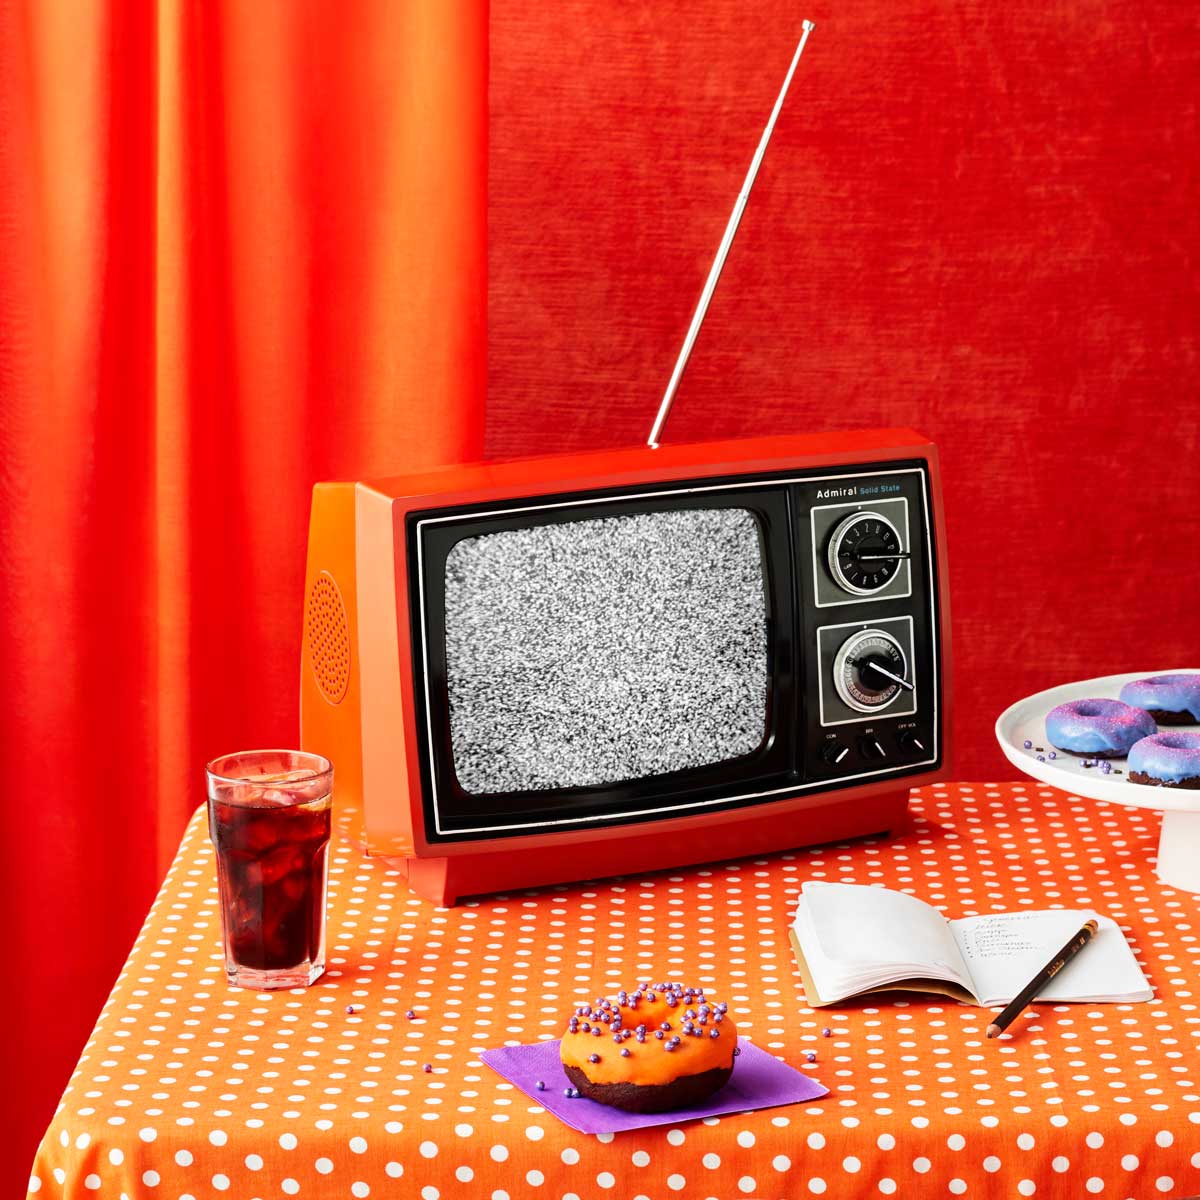 Photograph of a vibrant retro-style kitchen with an Admiral black & white television, donut, notebook, and glass of Coke.